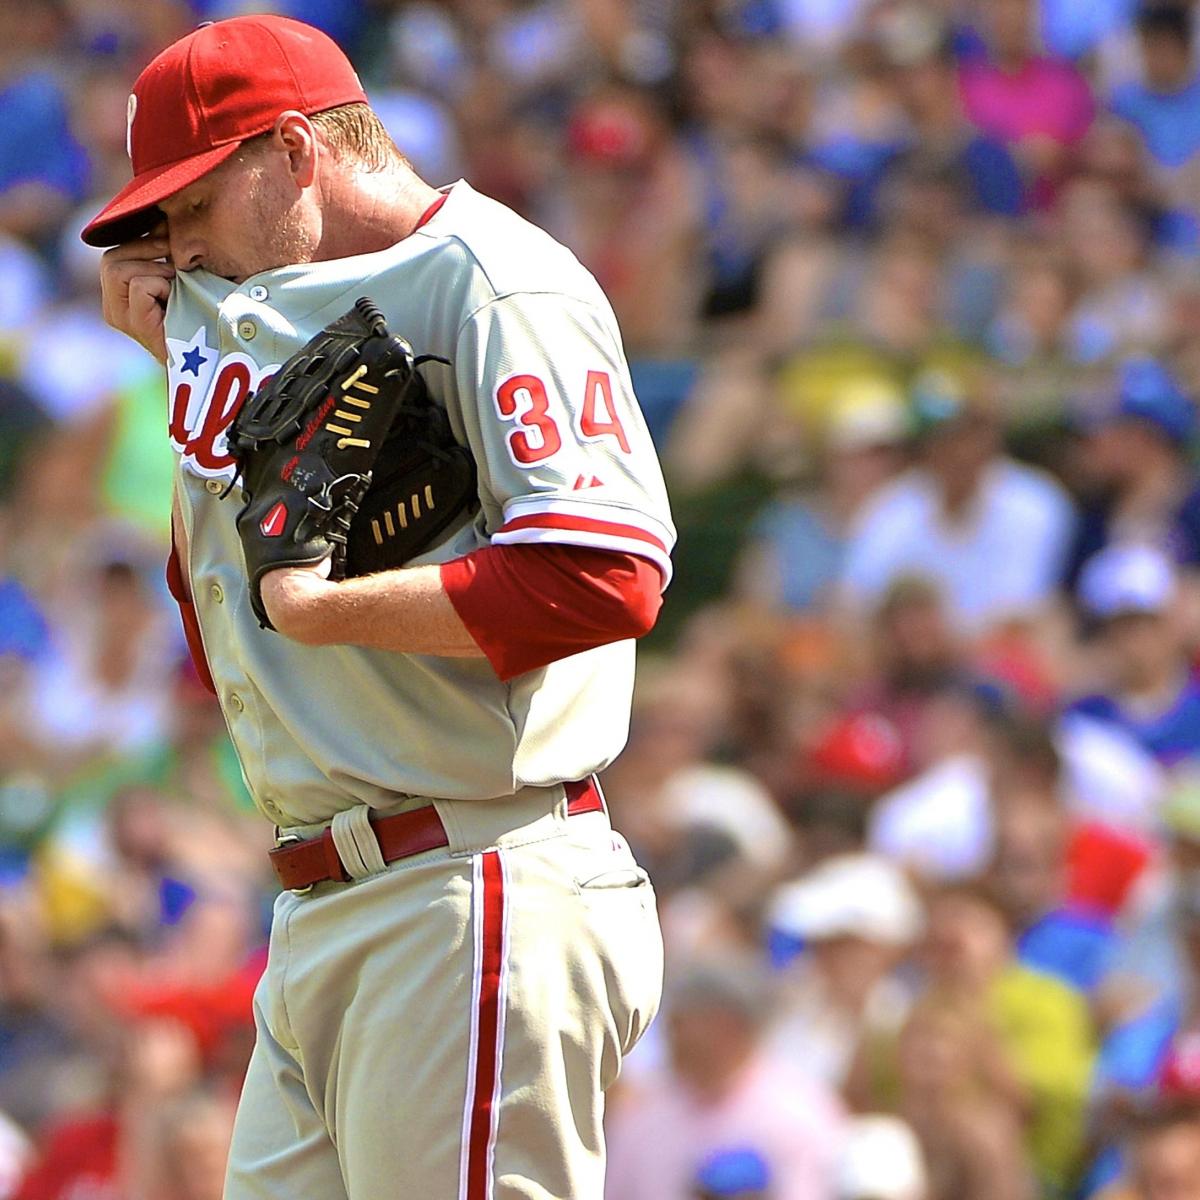 St. Louis Cardinals: Remembering the great Roy Halladay